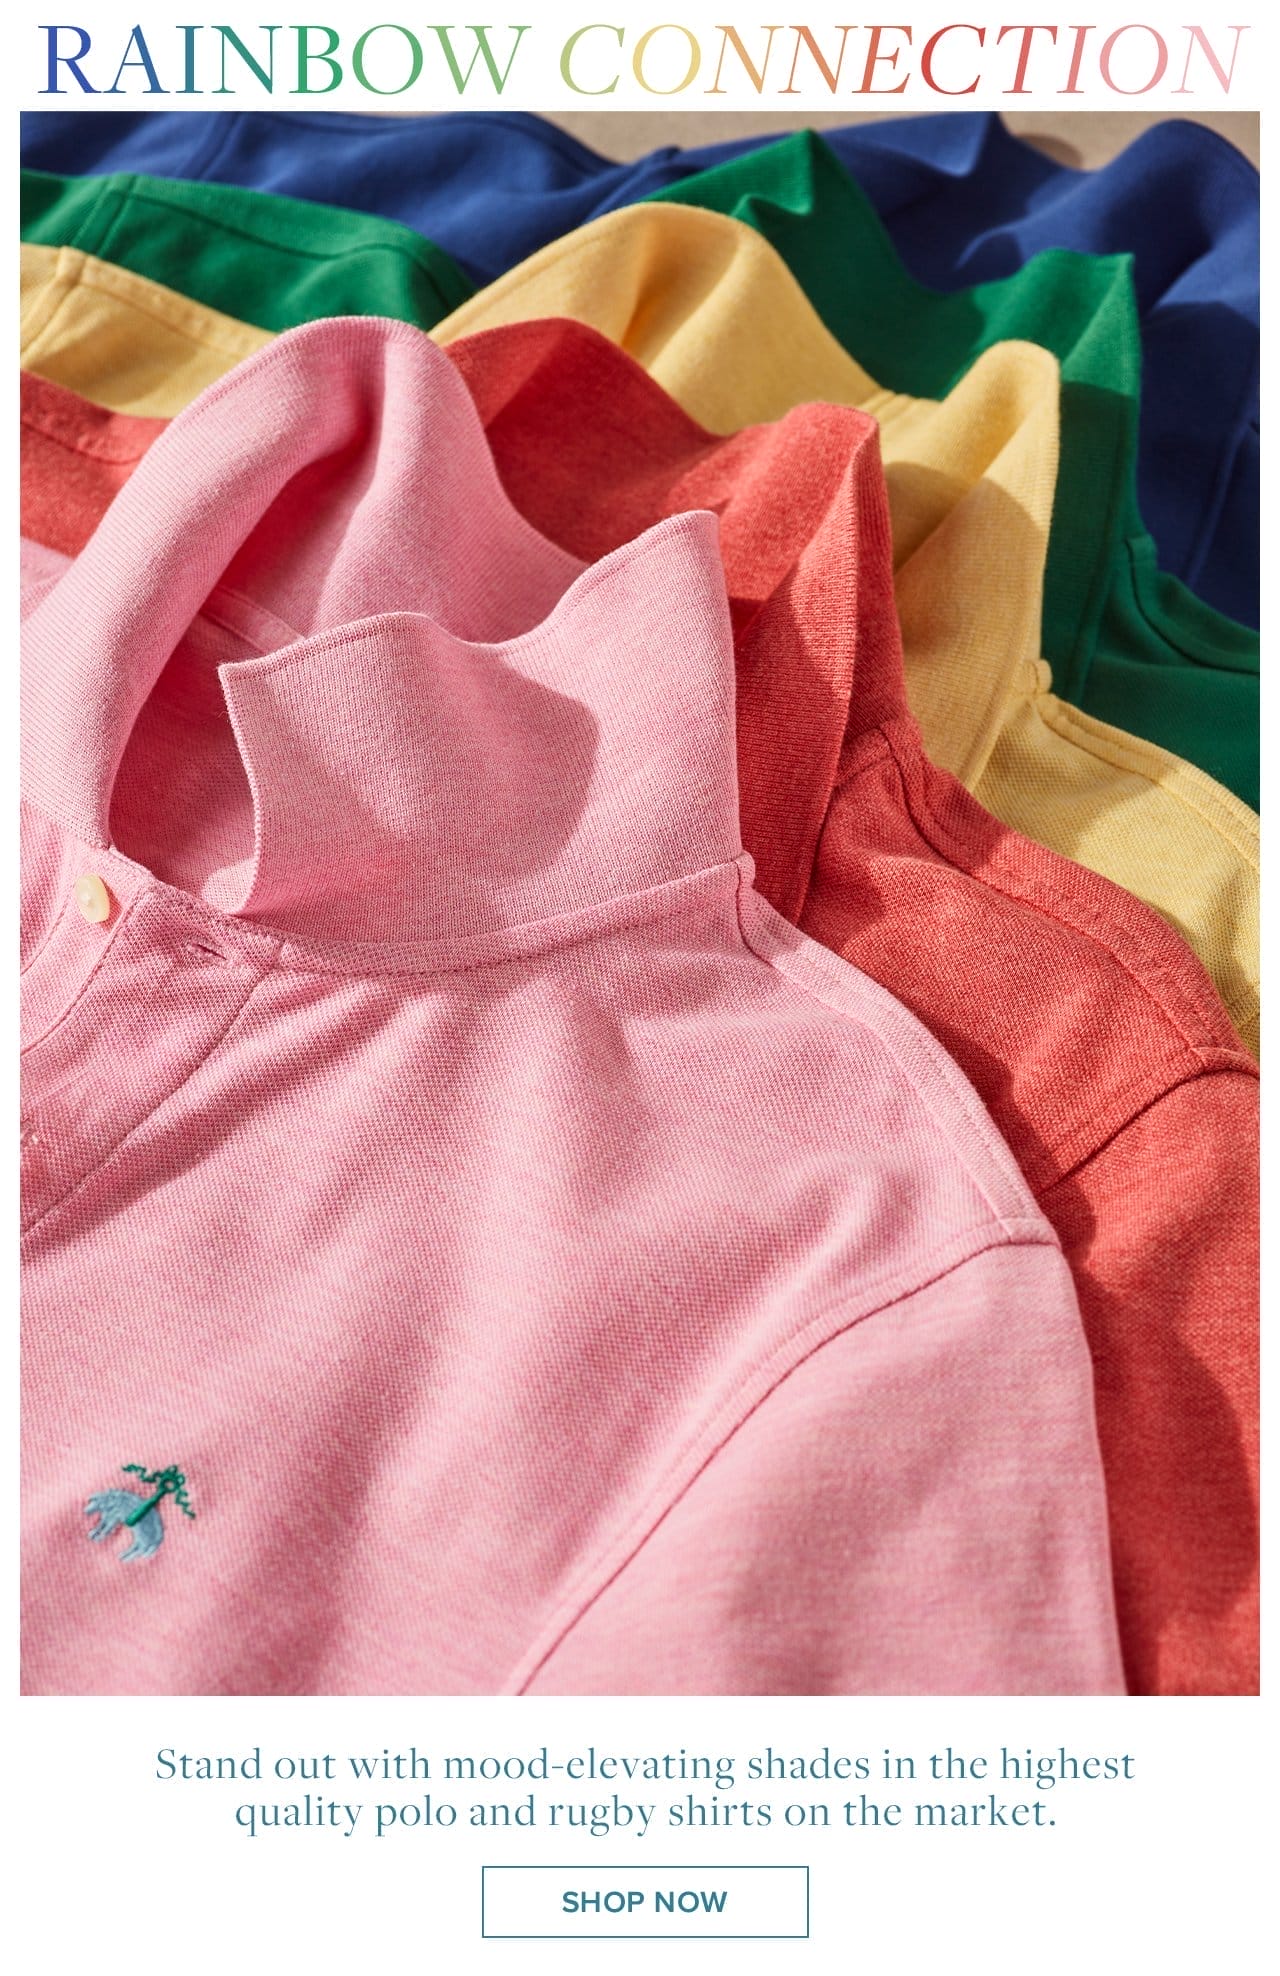 Rainbow Connection Stand out with mood-elevating shades in the highest quality polo and rugby shirts on the market. Shop Now